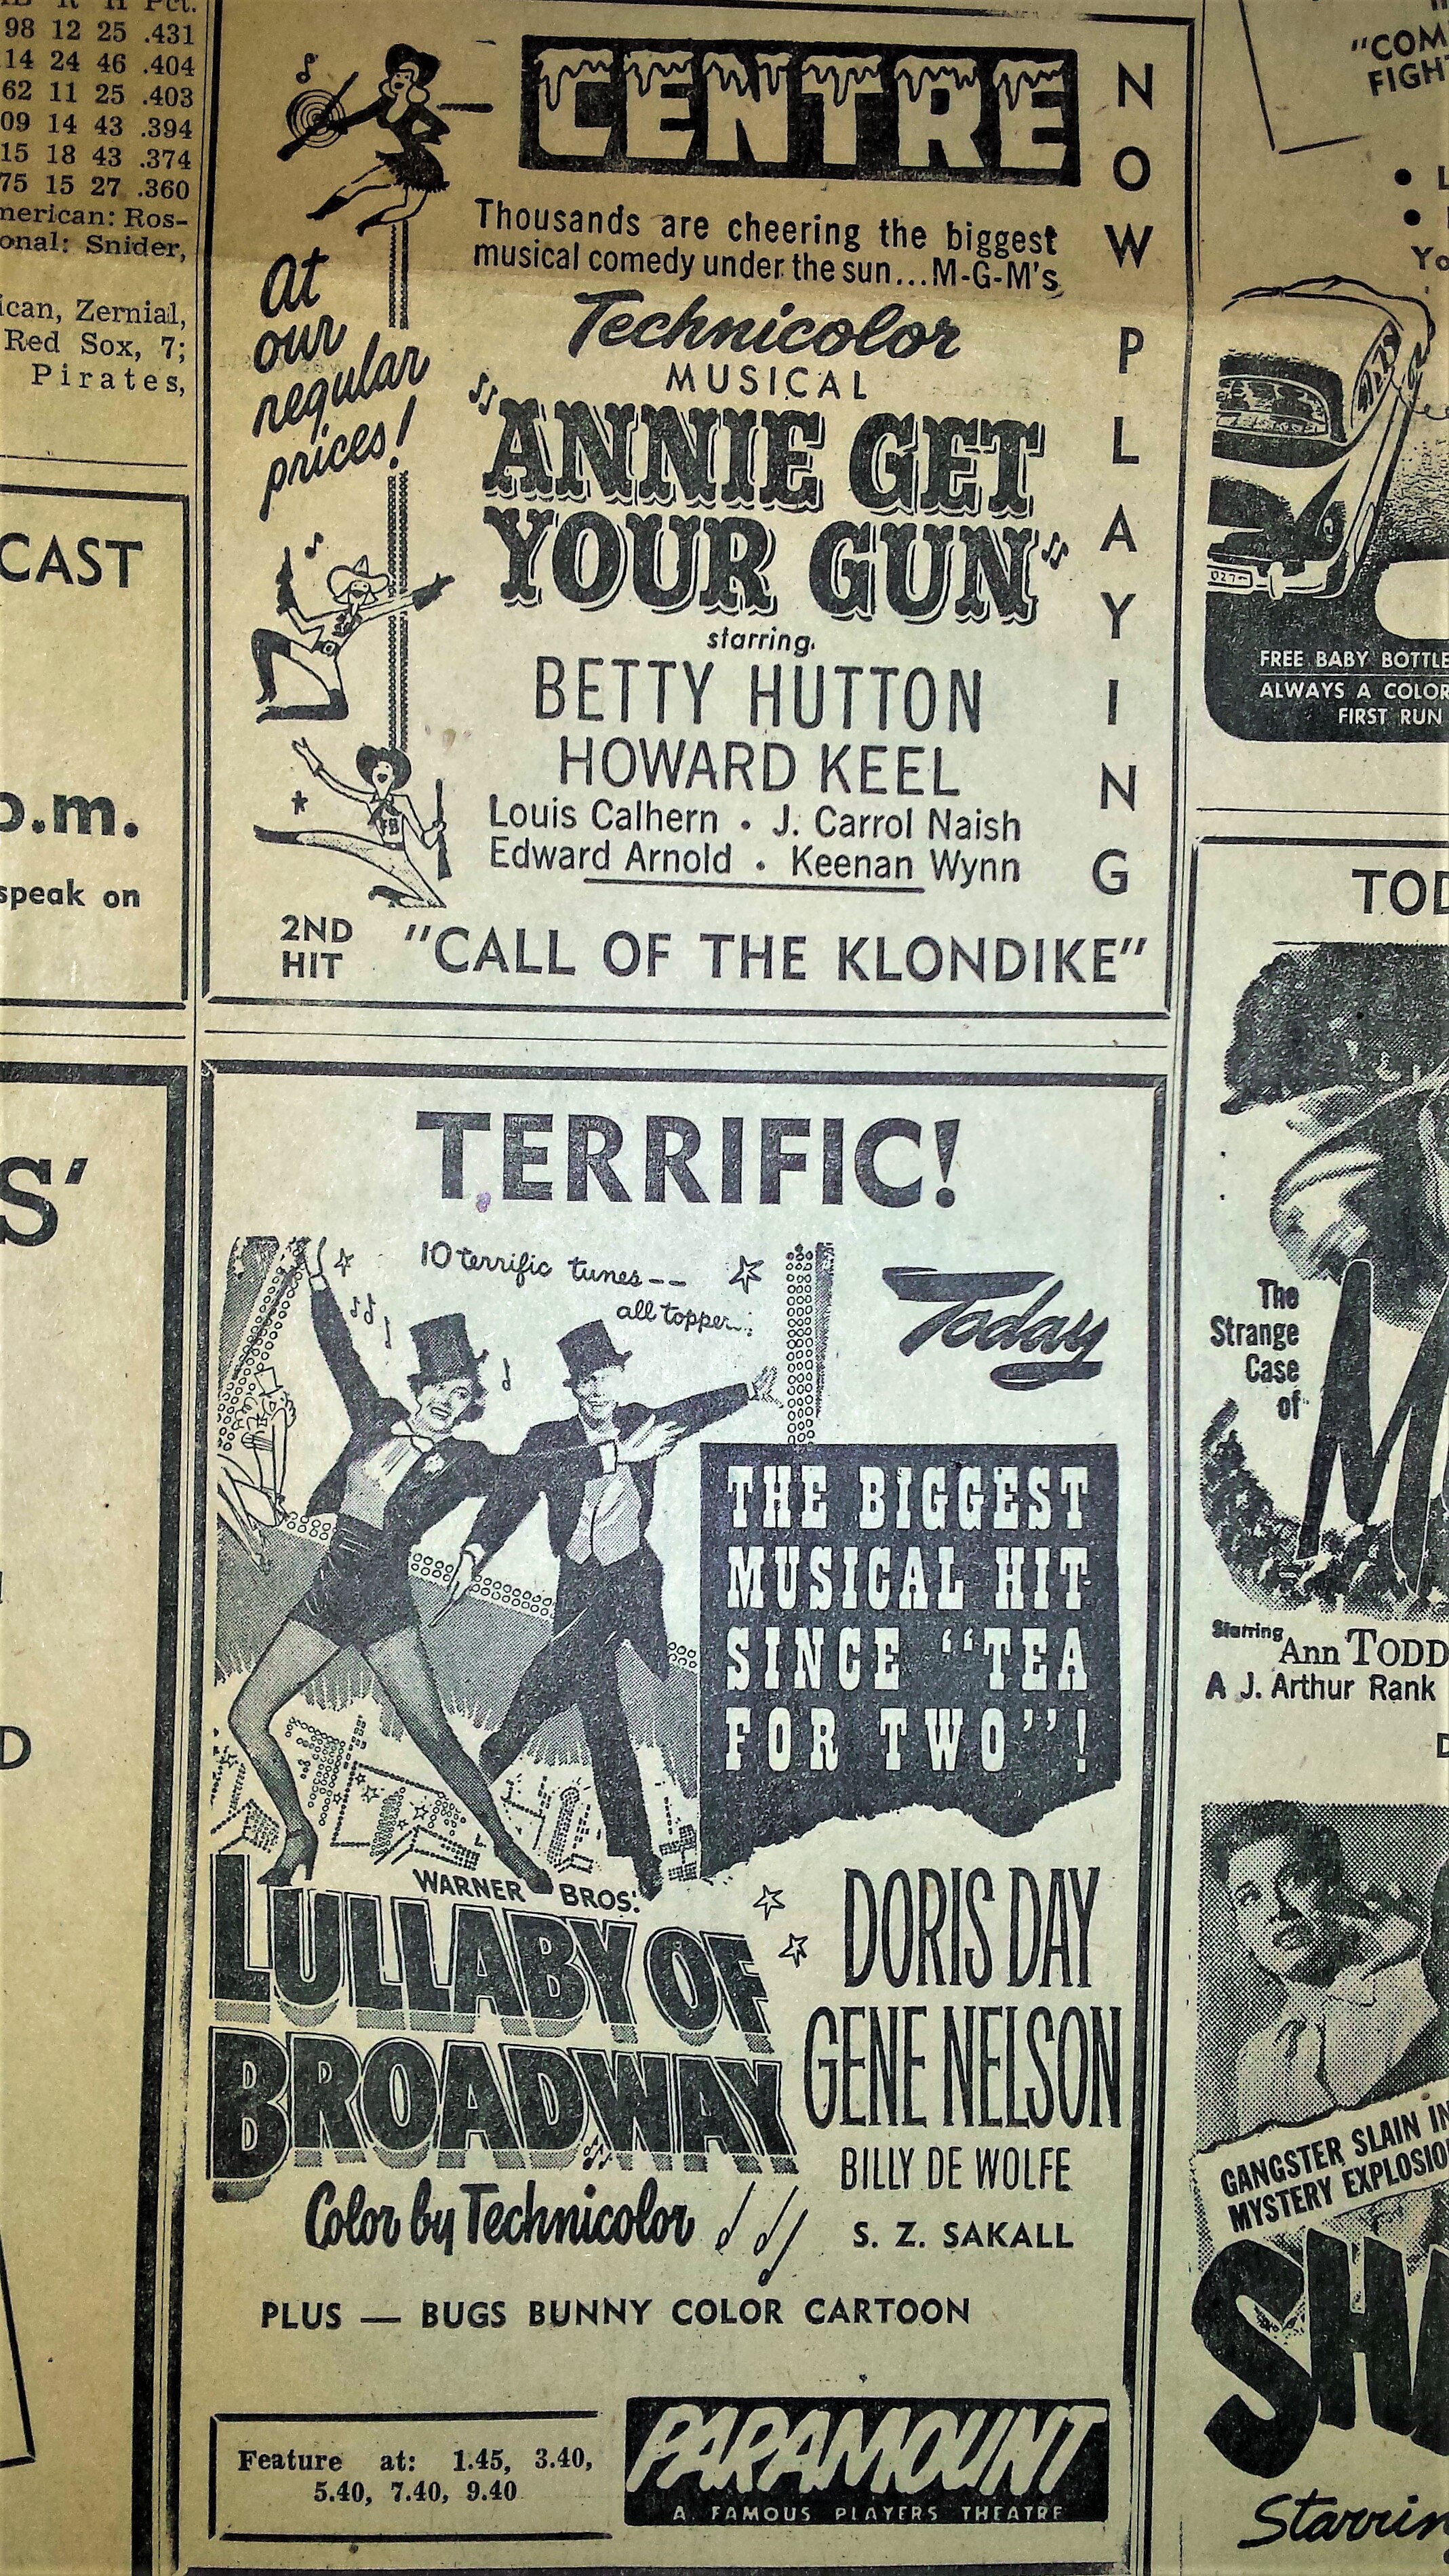 1951 May 21 p7 theatre ads Centre Paramount (2).jpg